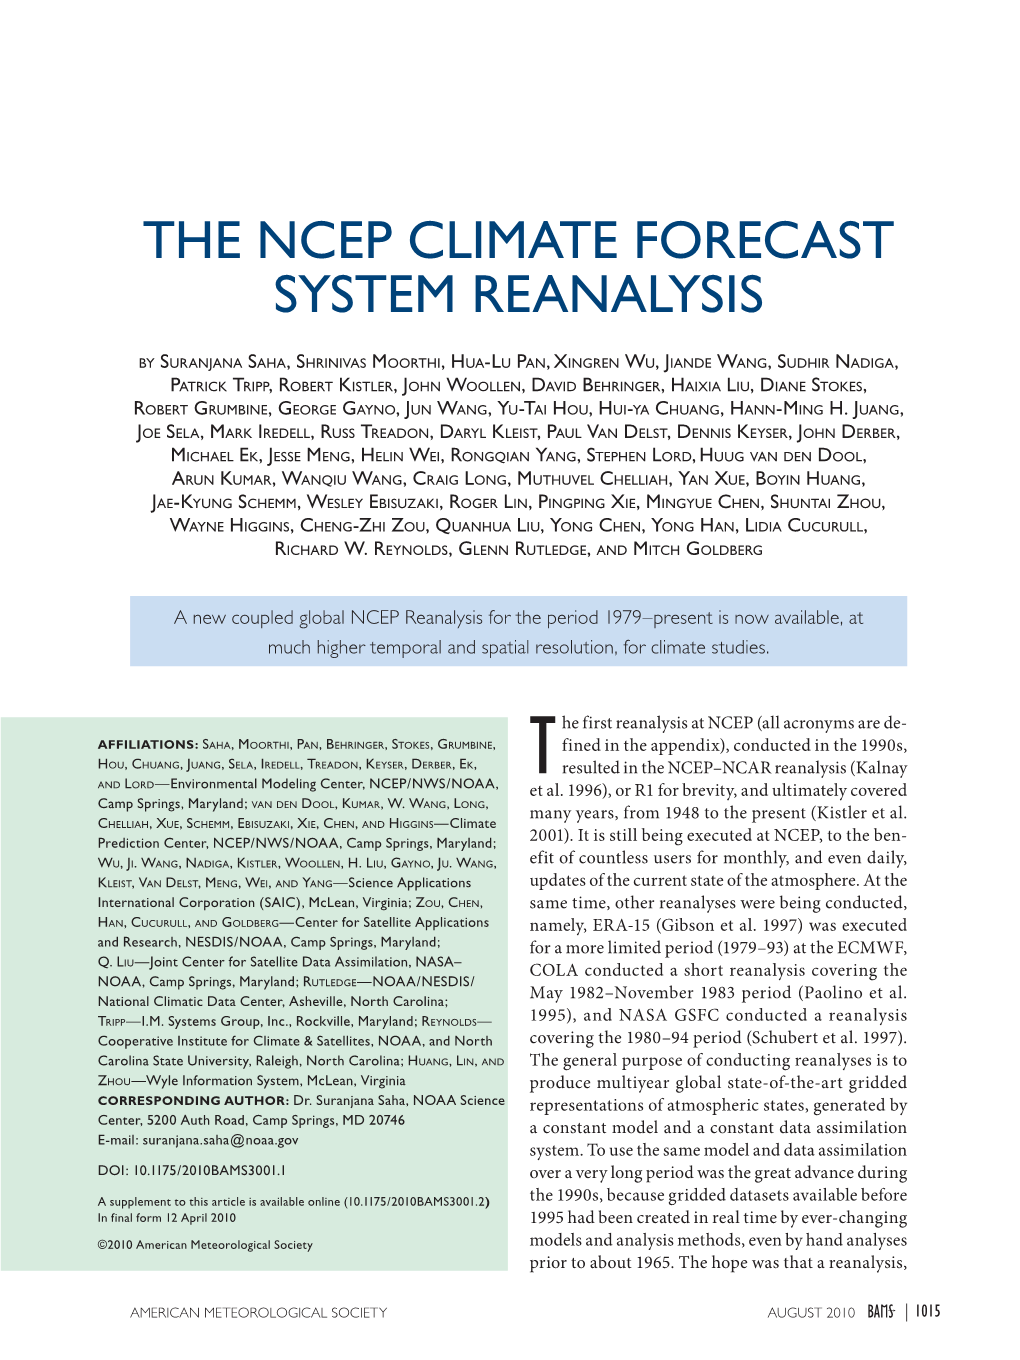 The NCEP Climate Forecast System Reanalysis